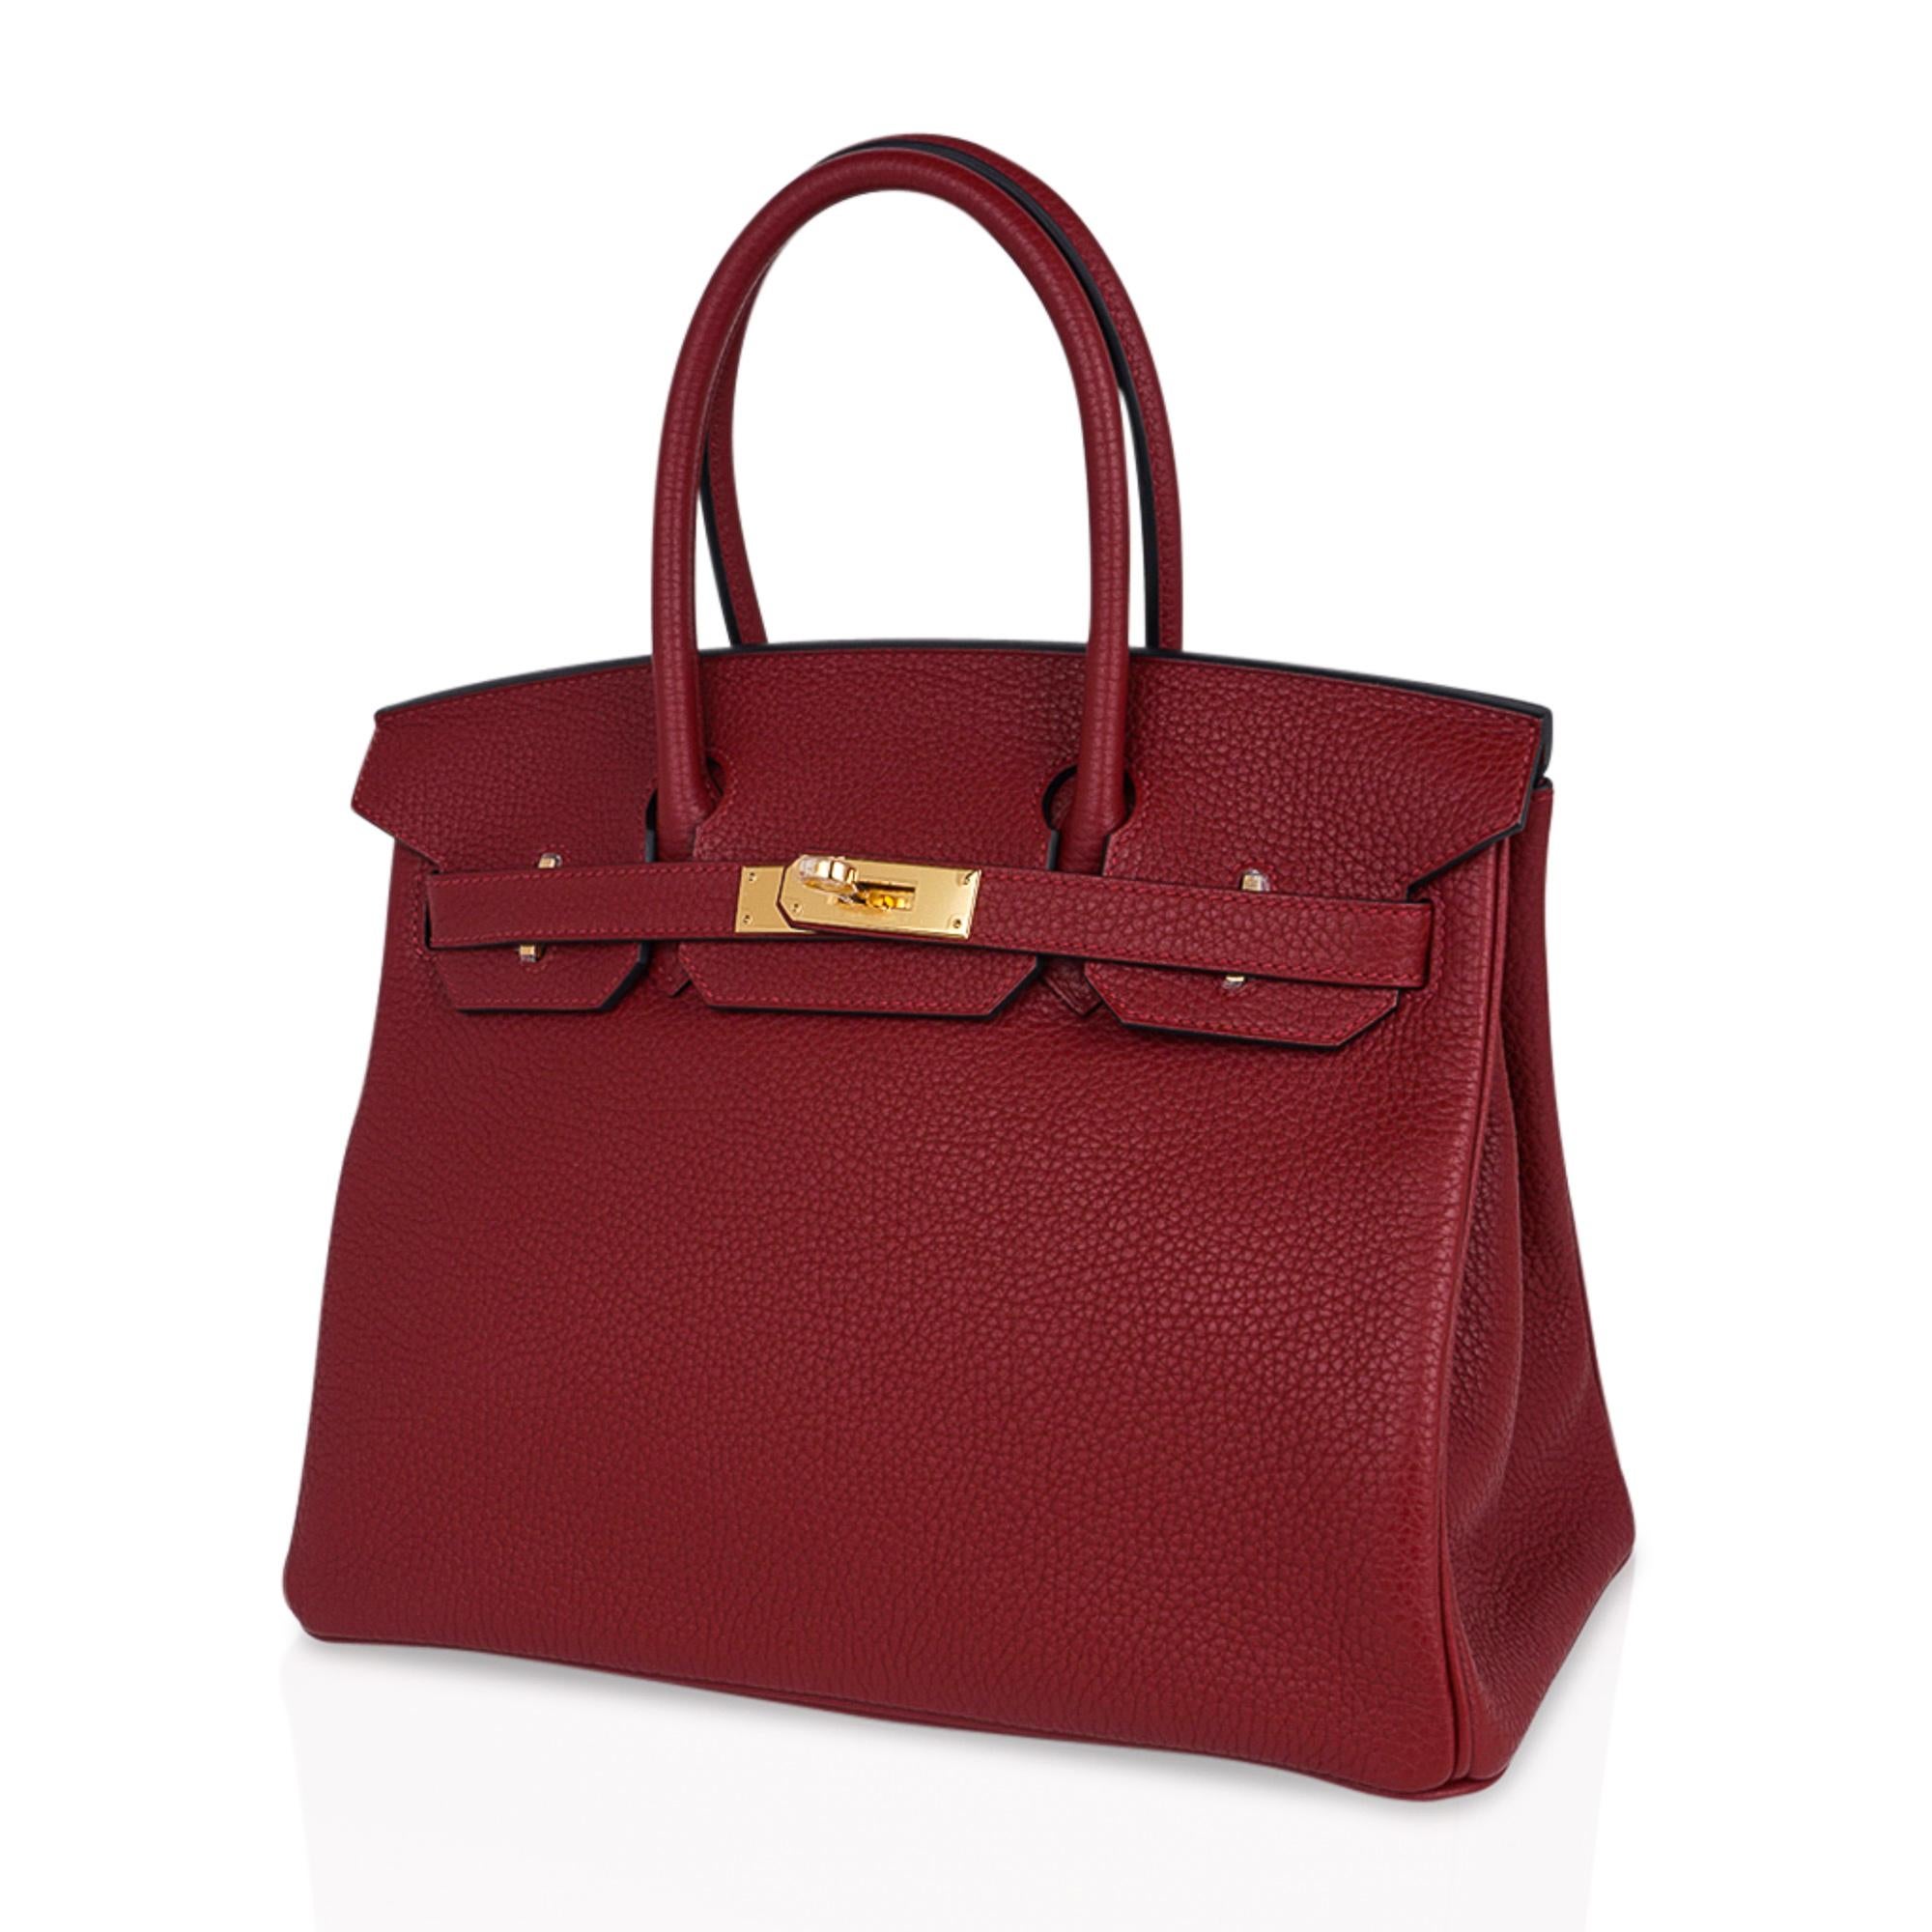 Hermes Birkin 30 Bag Rouge H Gold Hardware Clemence Leather New w/Box ...